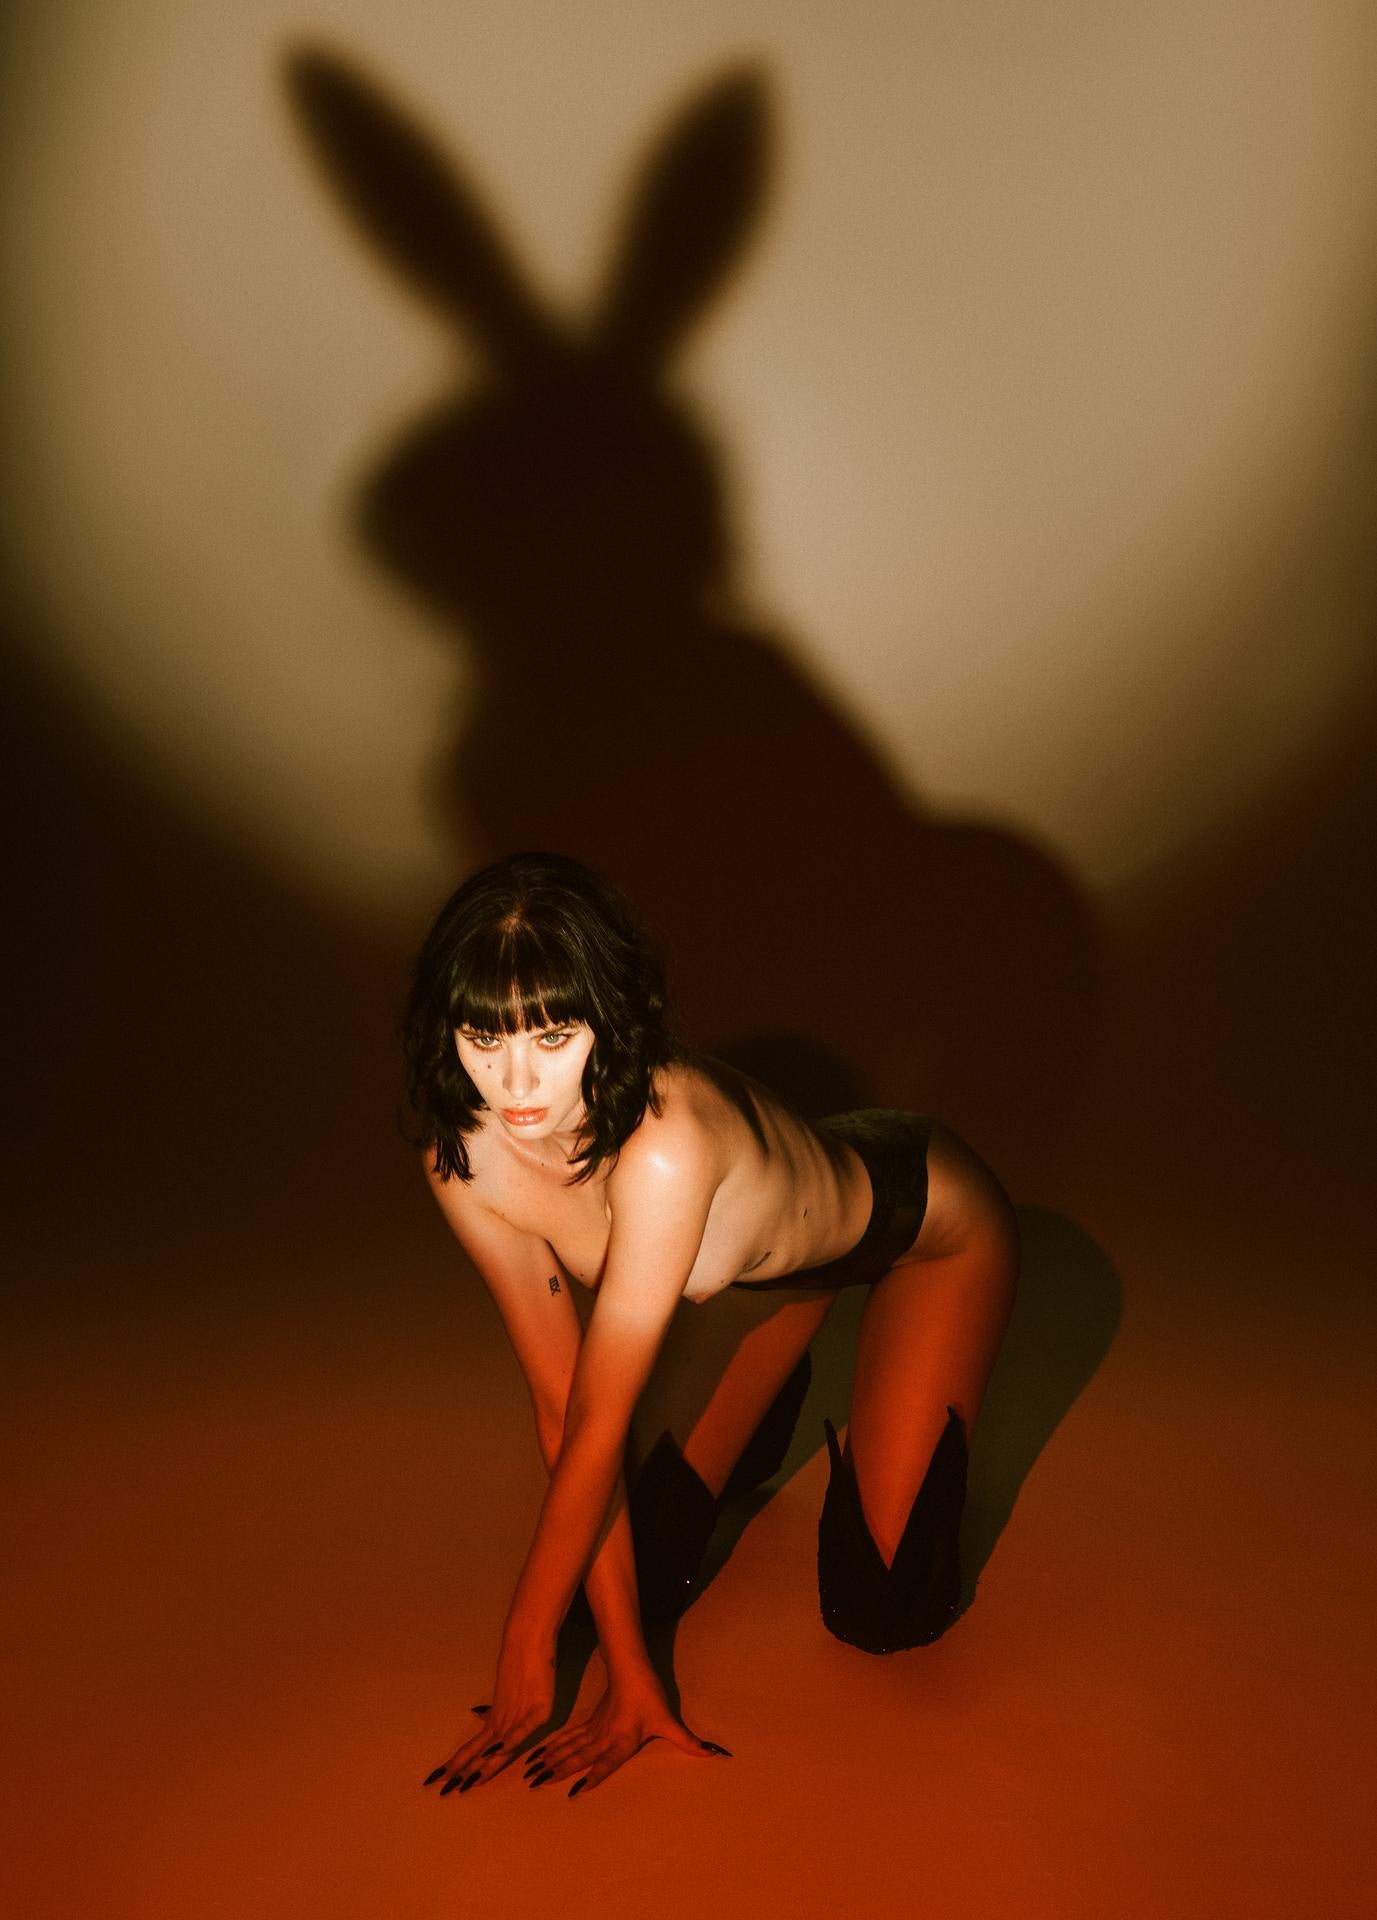 “Bad Bunny” Photography 36" x 28" inch Edition of 24 by Brian Ziff 